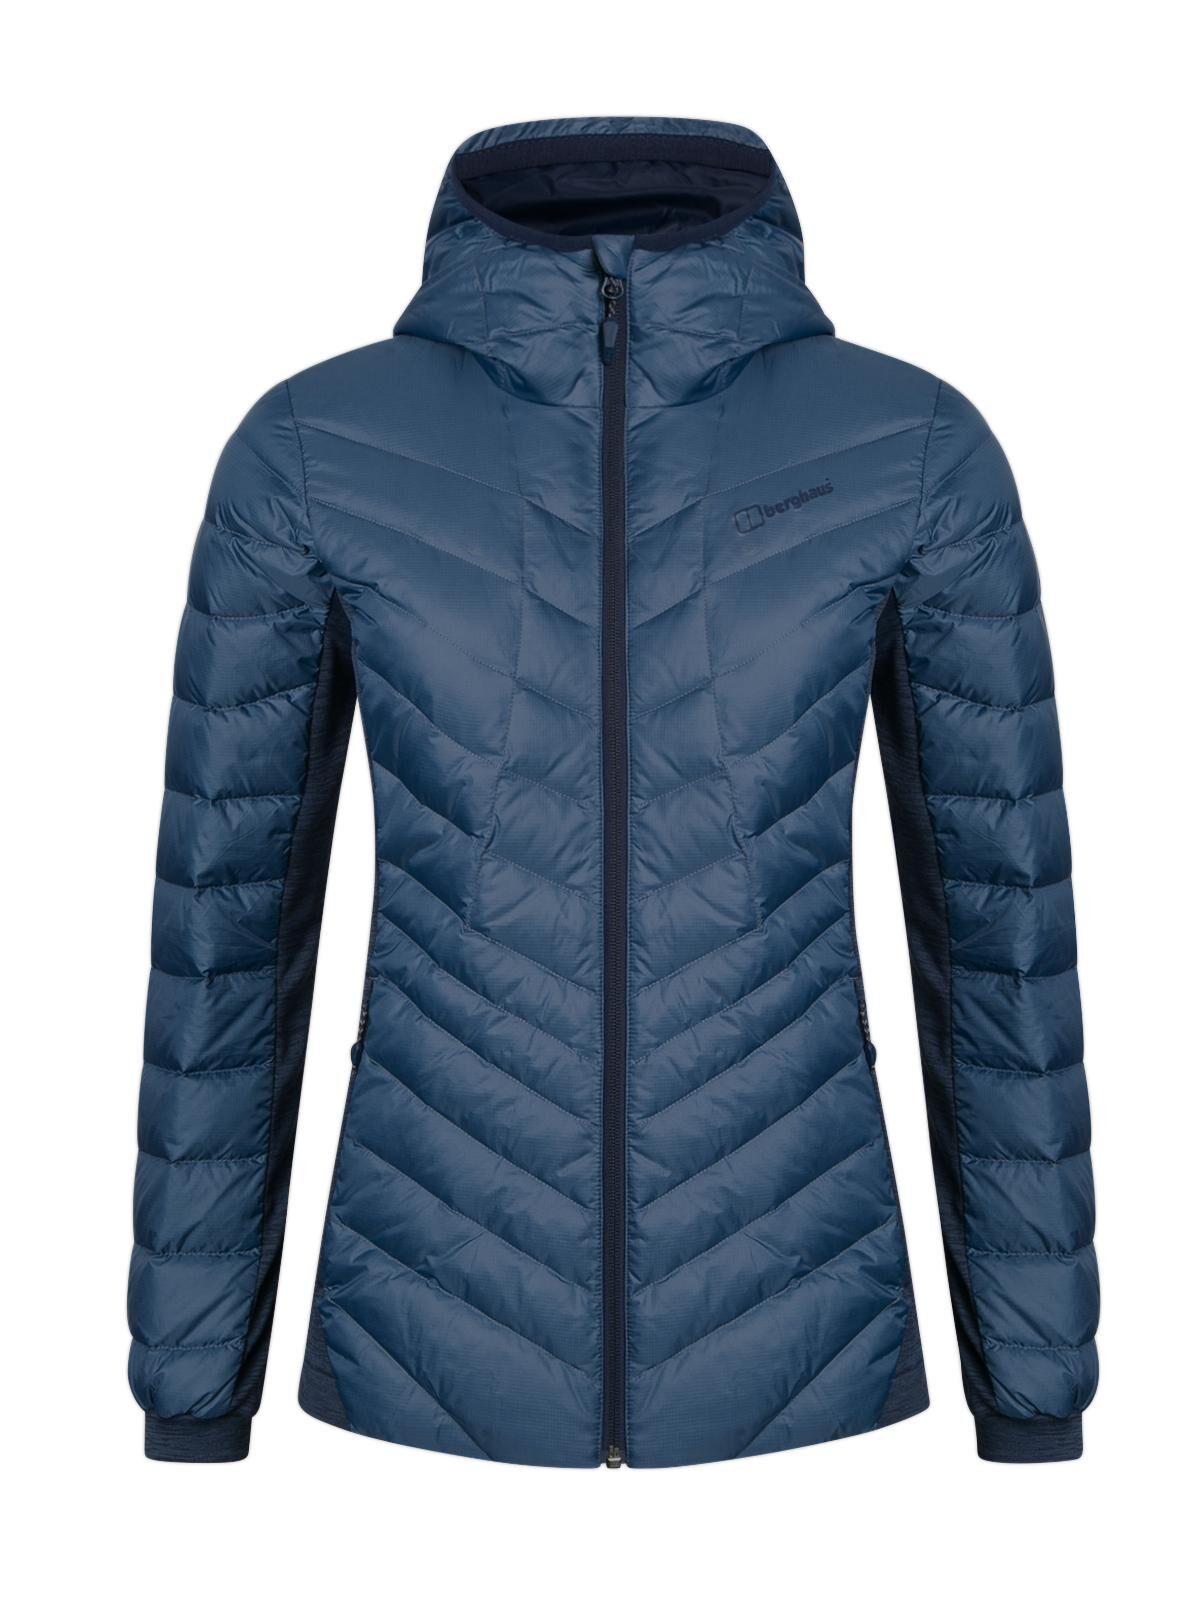 Berghaus Tephra Stretch Reflect Down Insulated Jacket - Down jacket - Women's